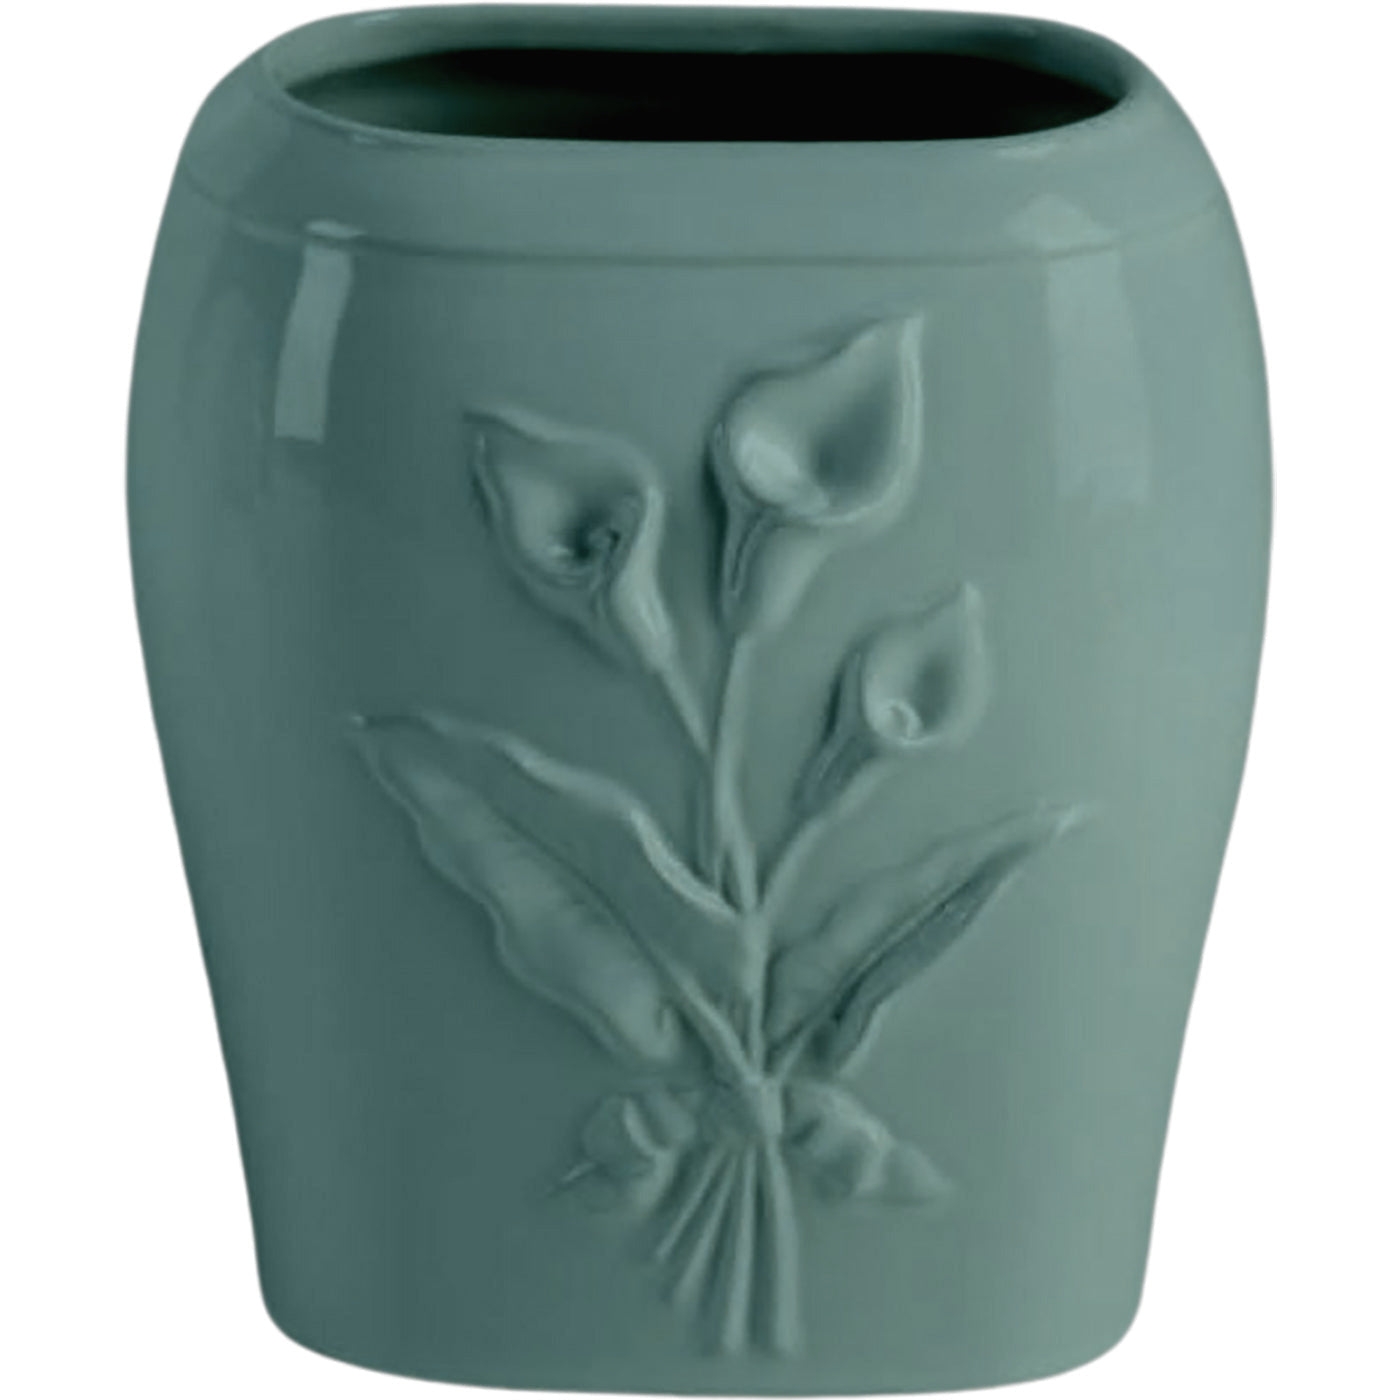 Rectangular grave vase Calla green 19x17cm - 7.5x6.7in In green porcelain, wall attached CAL160P/V